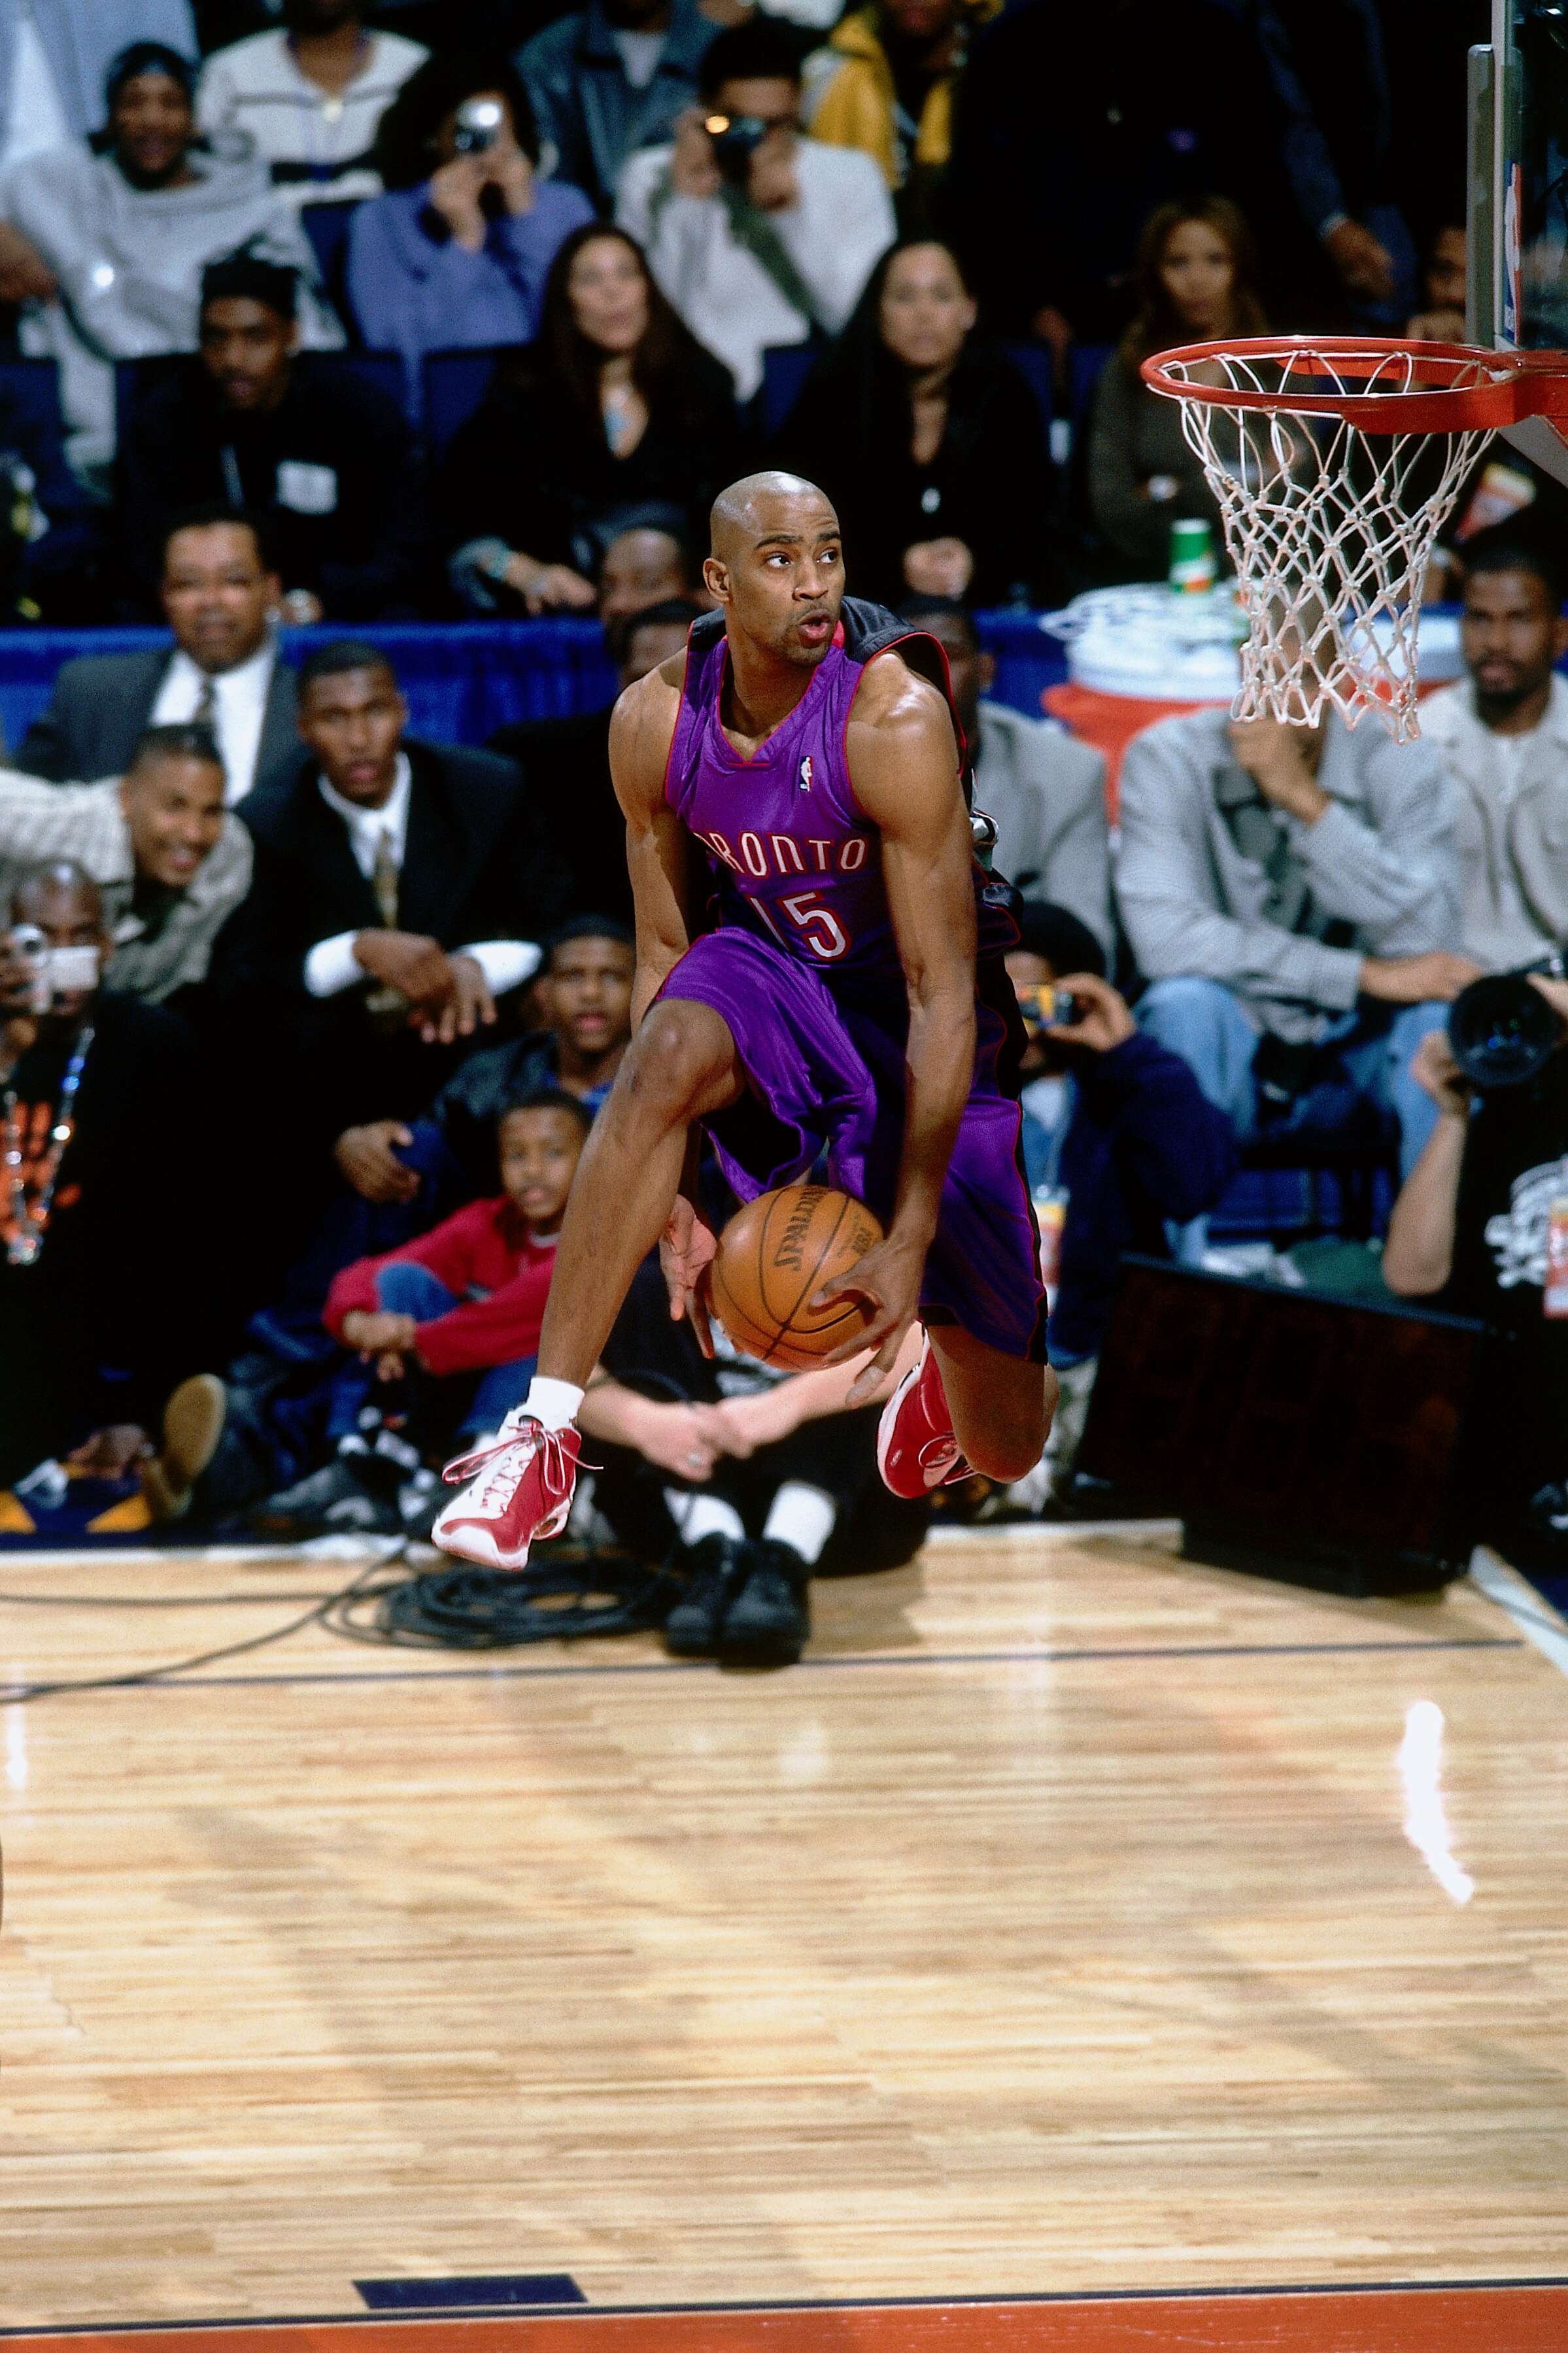 Vince Carter says he would like to see the Raptors retire his jersey number  - Article - Bardown